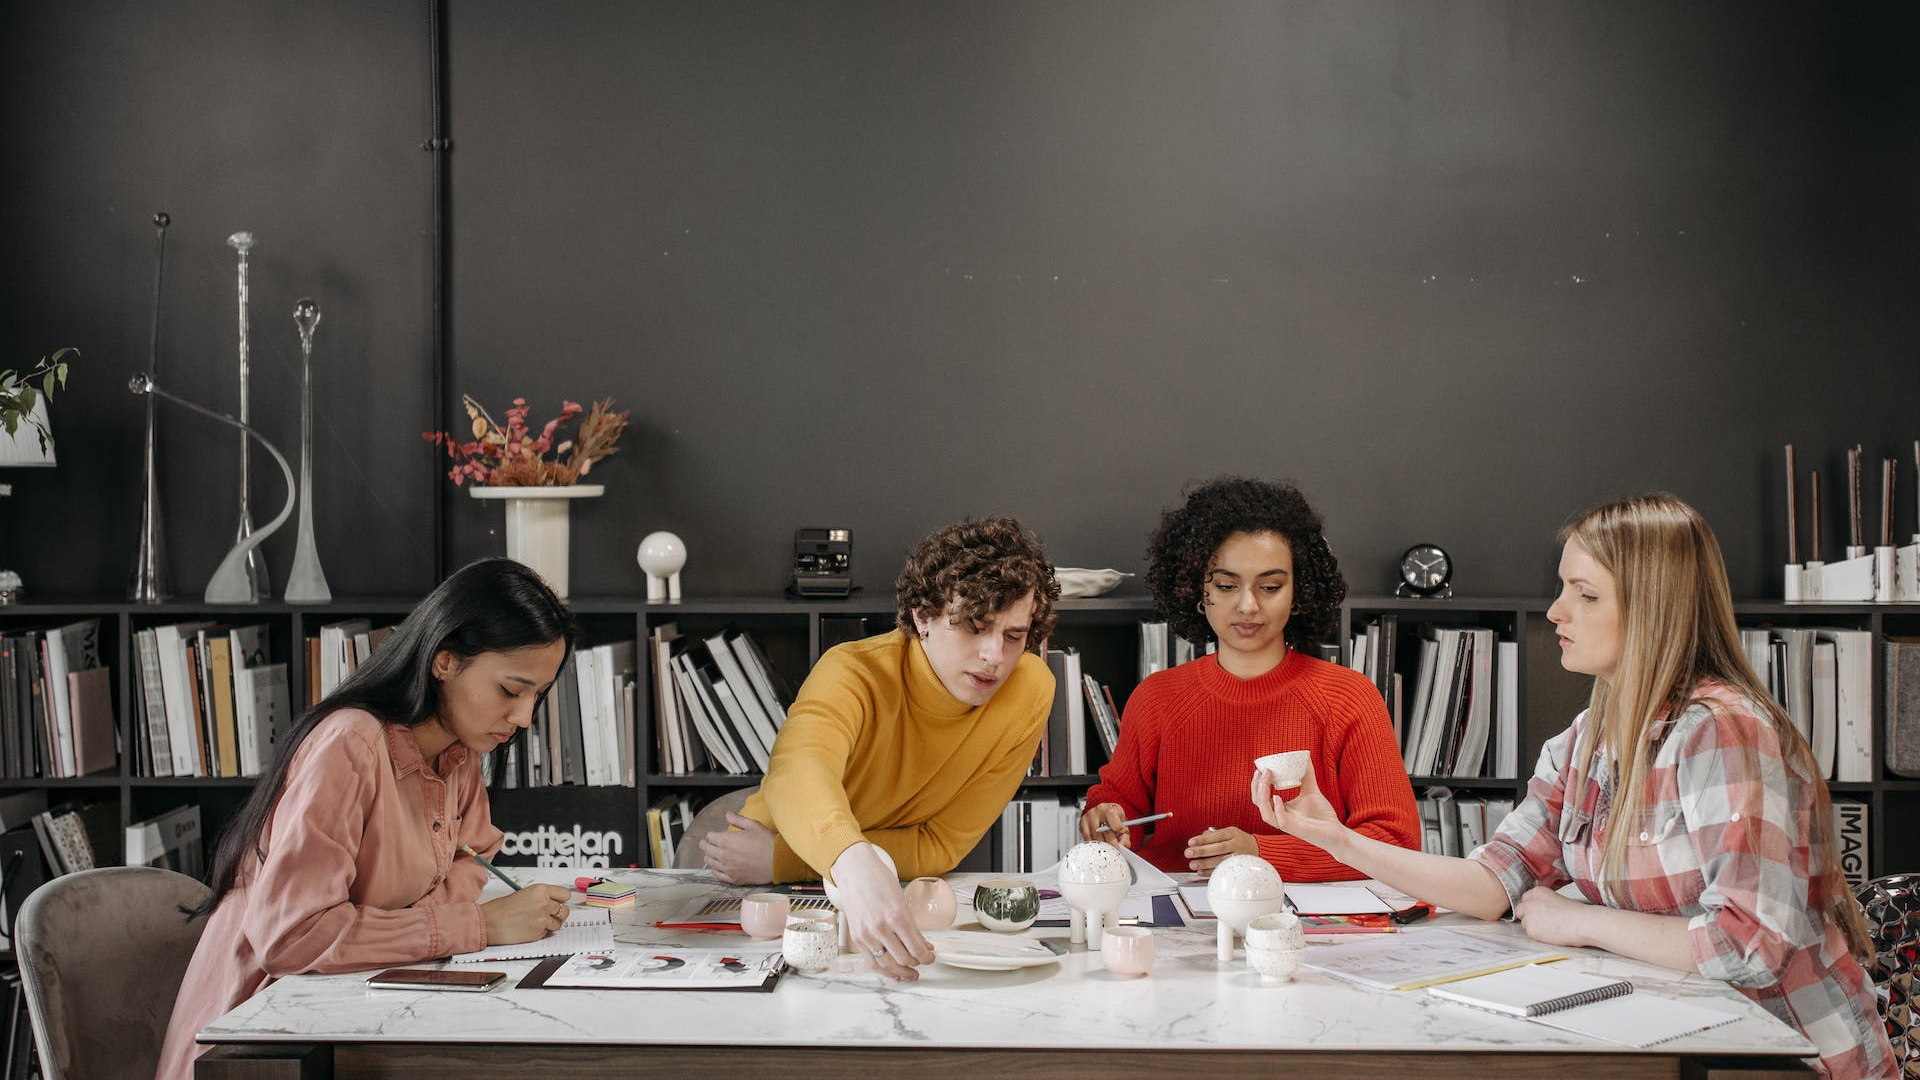 Four creative professionals engaged in a collaborative meeting around a table, surrounded by books and design materials, brainstorming ideas to harness the concept of 'Herd Mentality' in their project.